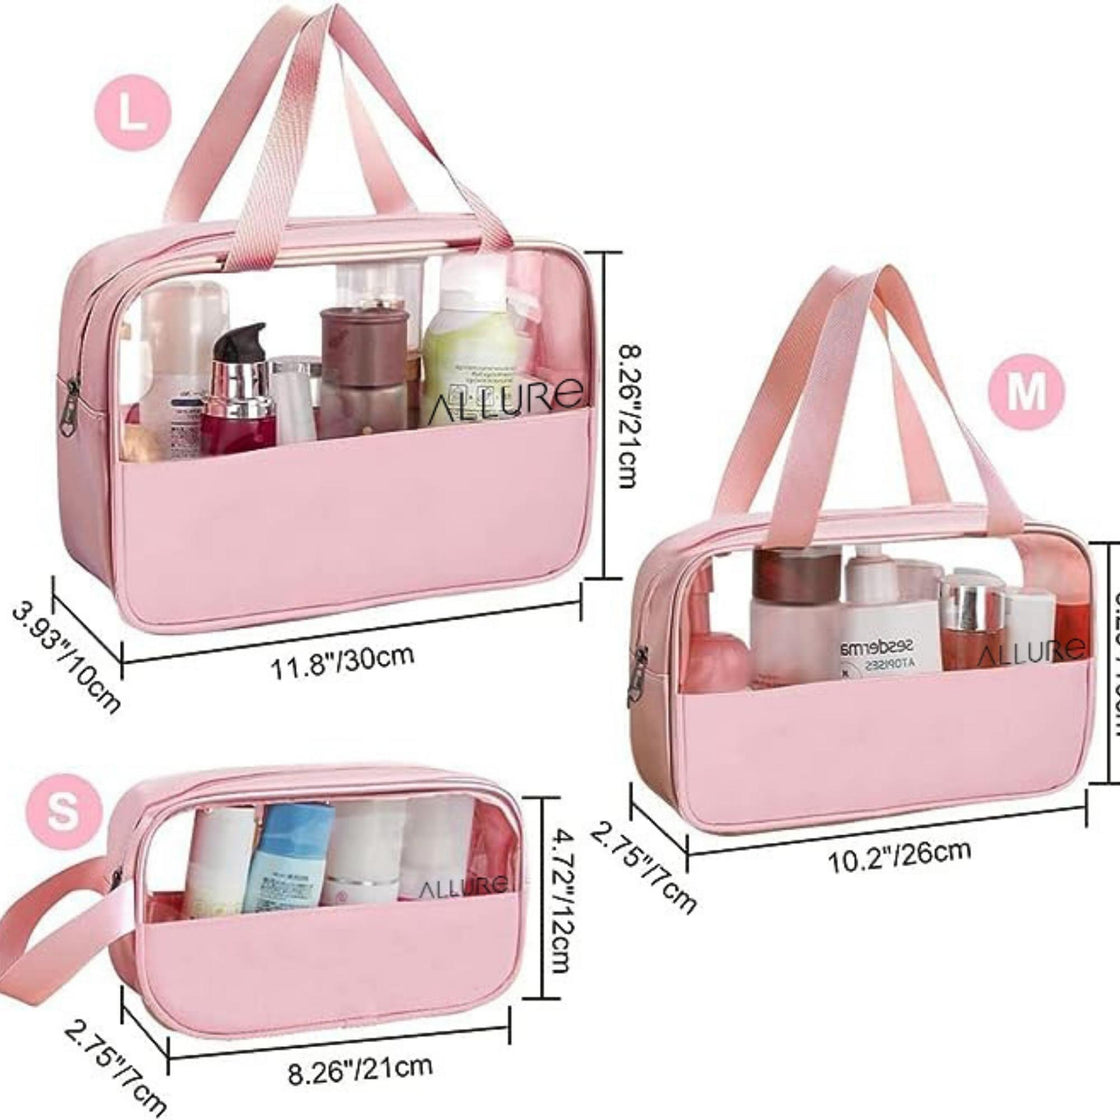 Allure Pack of 3 Toiletry Bag Pink